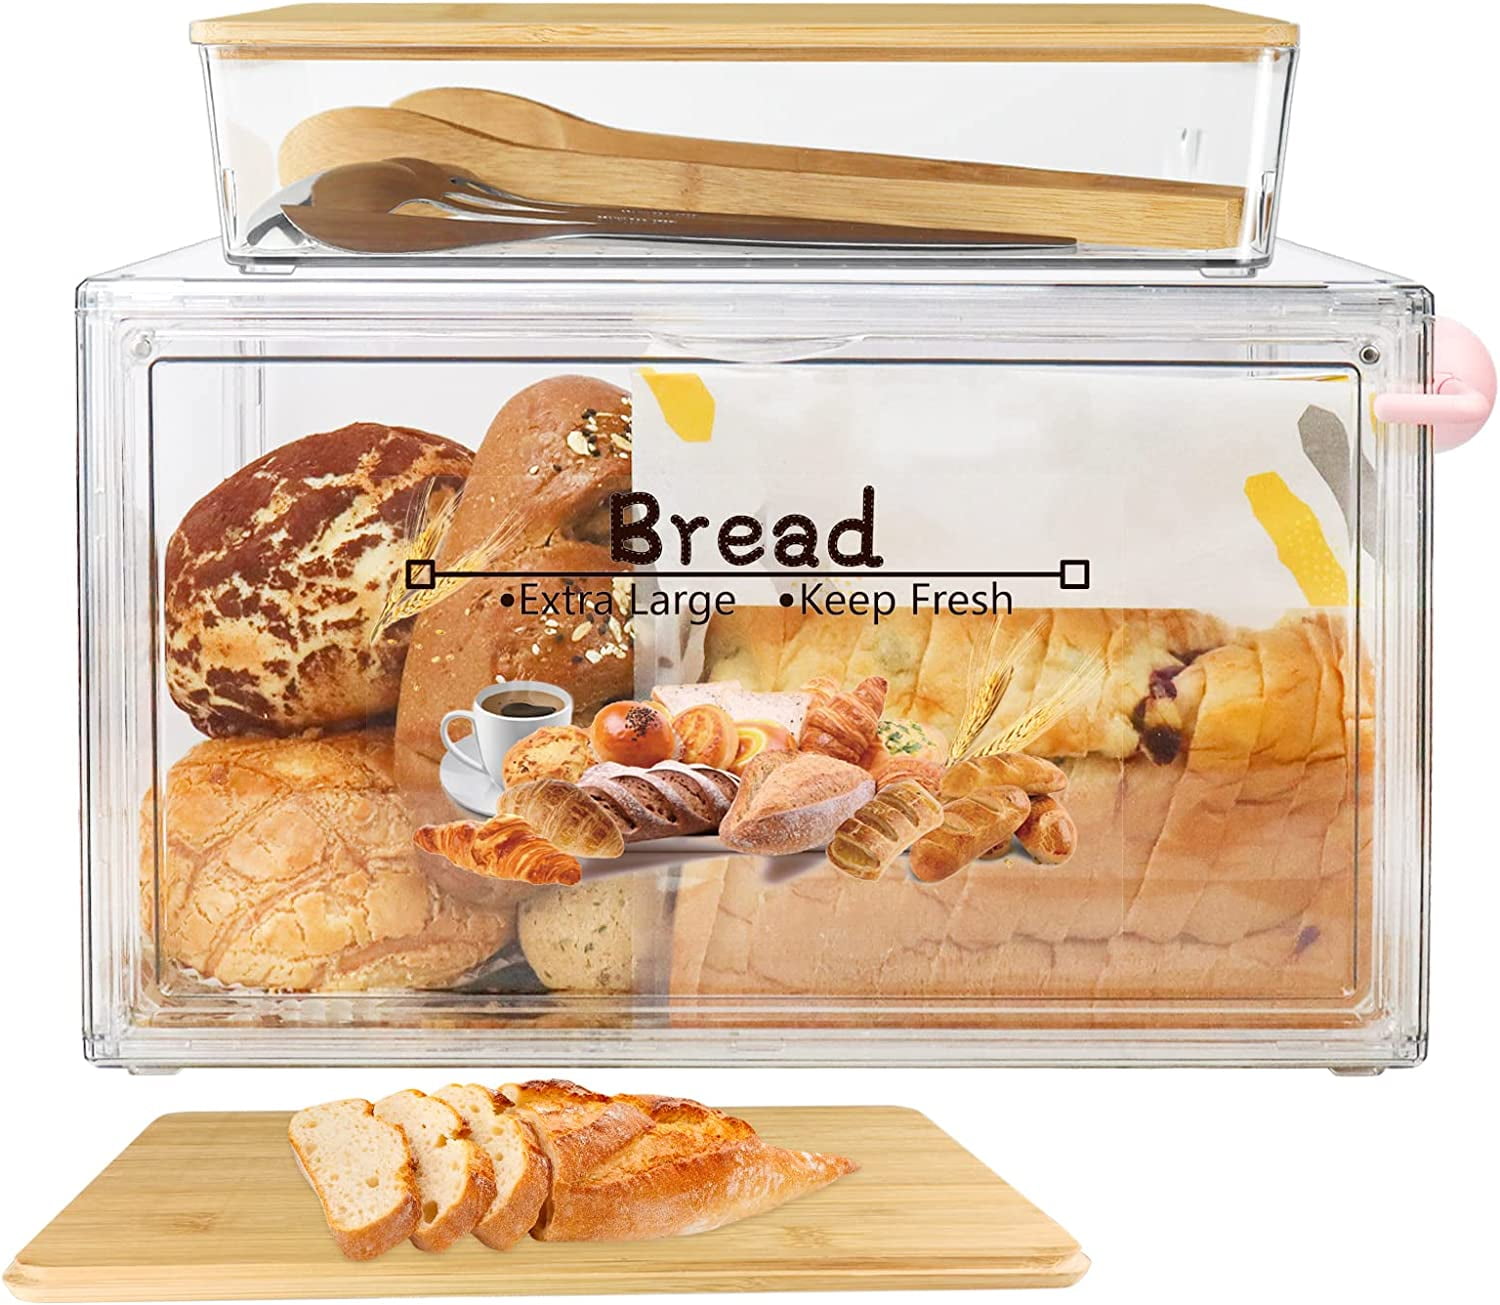 Transparent Bread Boxes Cake Boxes Multi Storage Box Storage Containers  Bread Holder for Keeping Flavor Organizer for Kitchen Countertop  21.3x14.7x12.7cm 